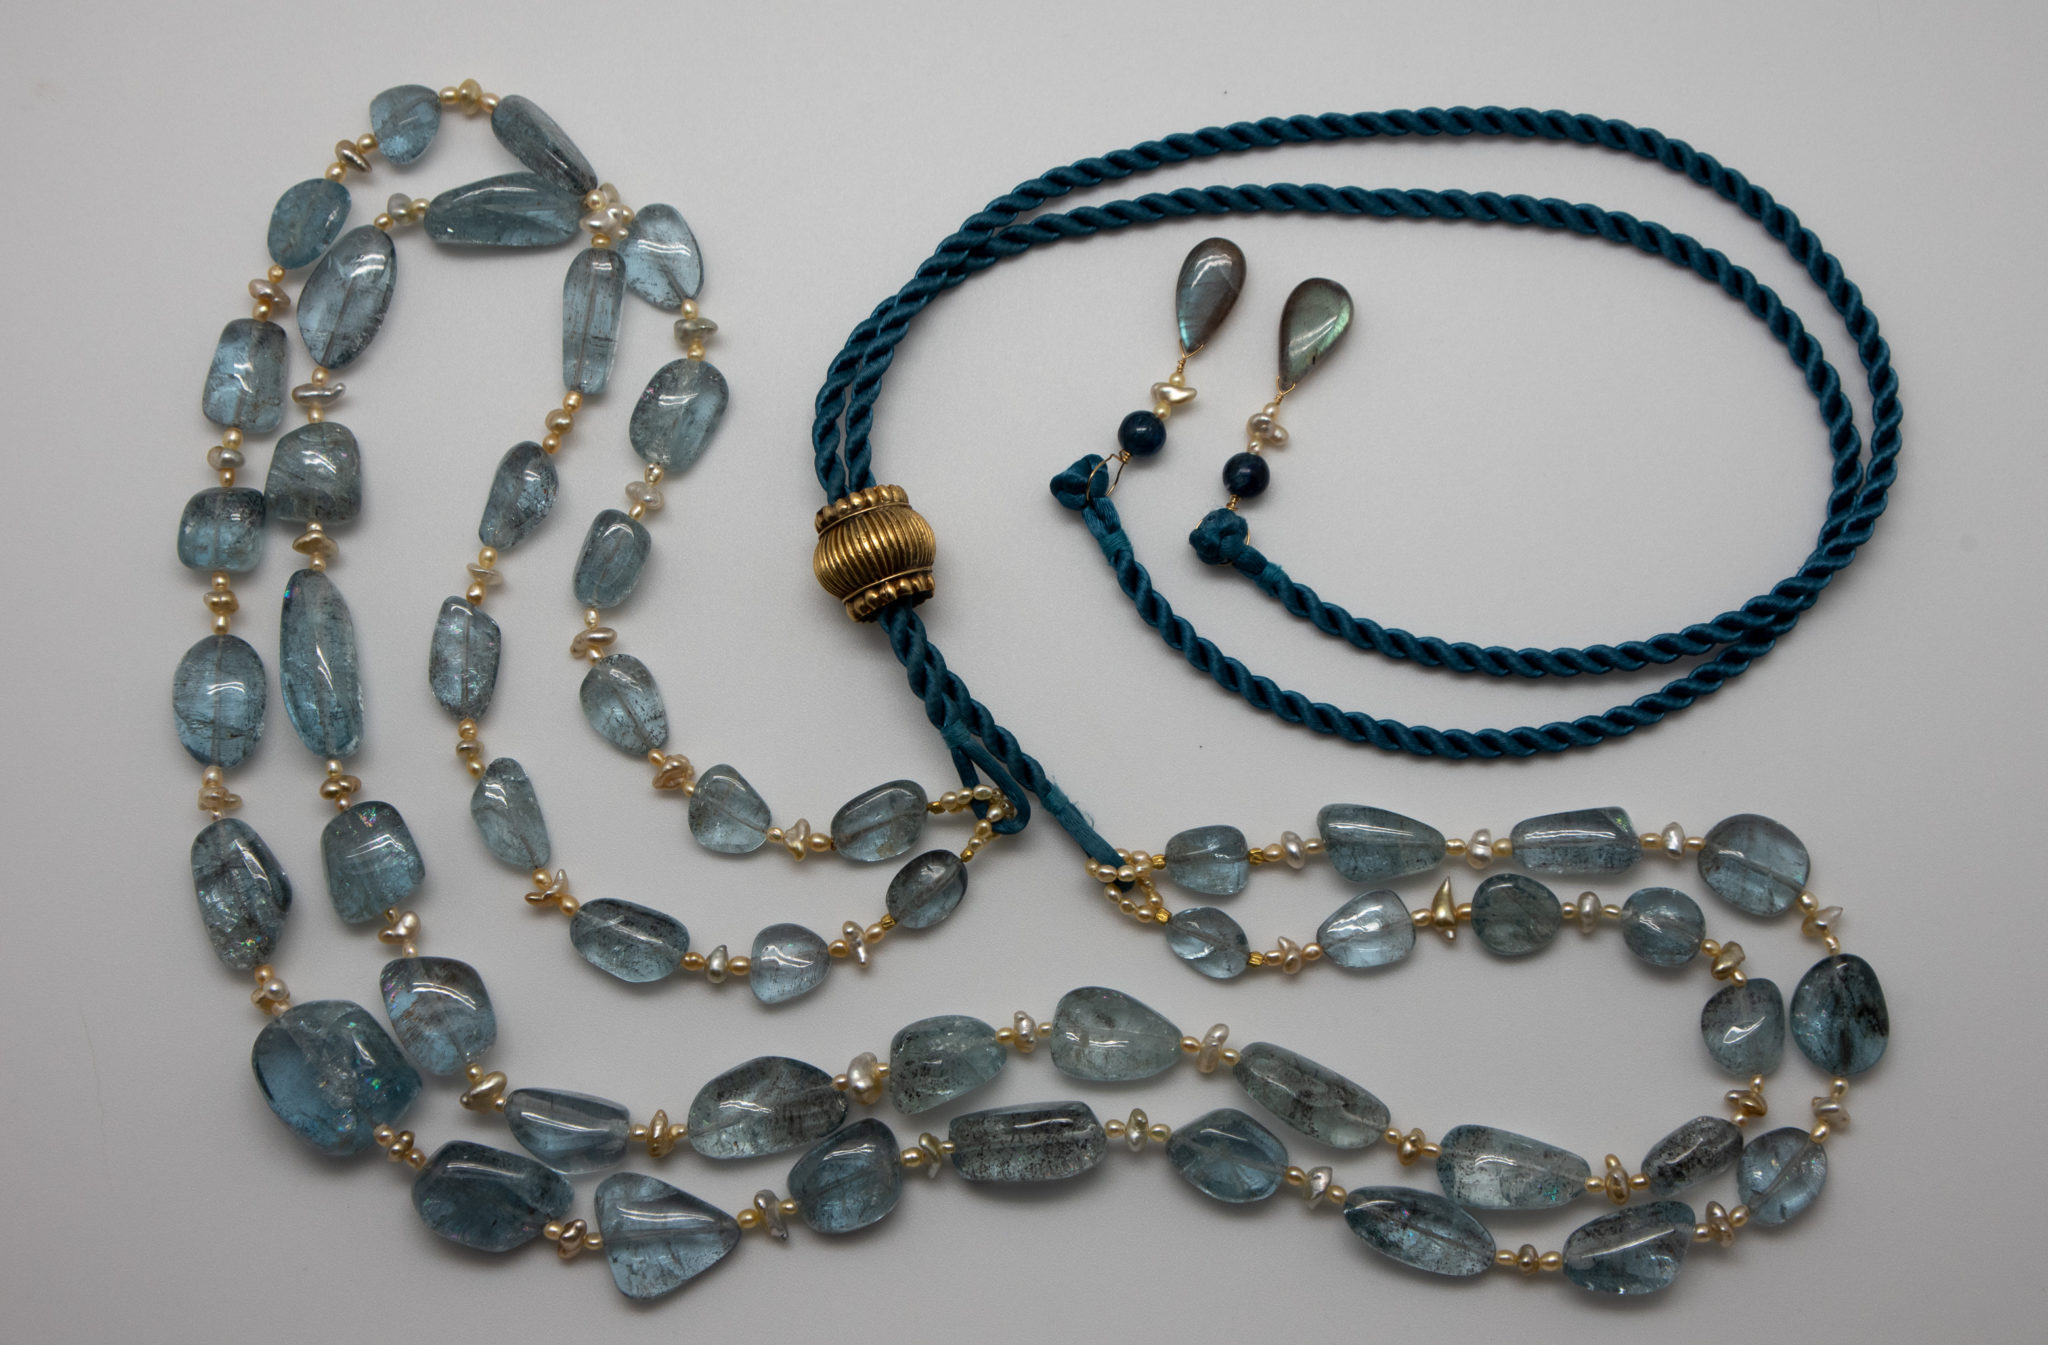 aquamarine crystals double-strand necklace with silk cords and antiques gold bead clasp